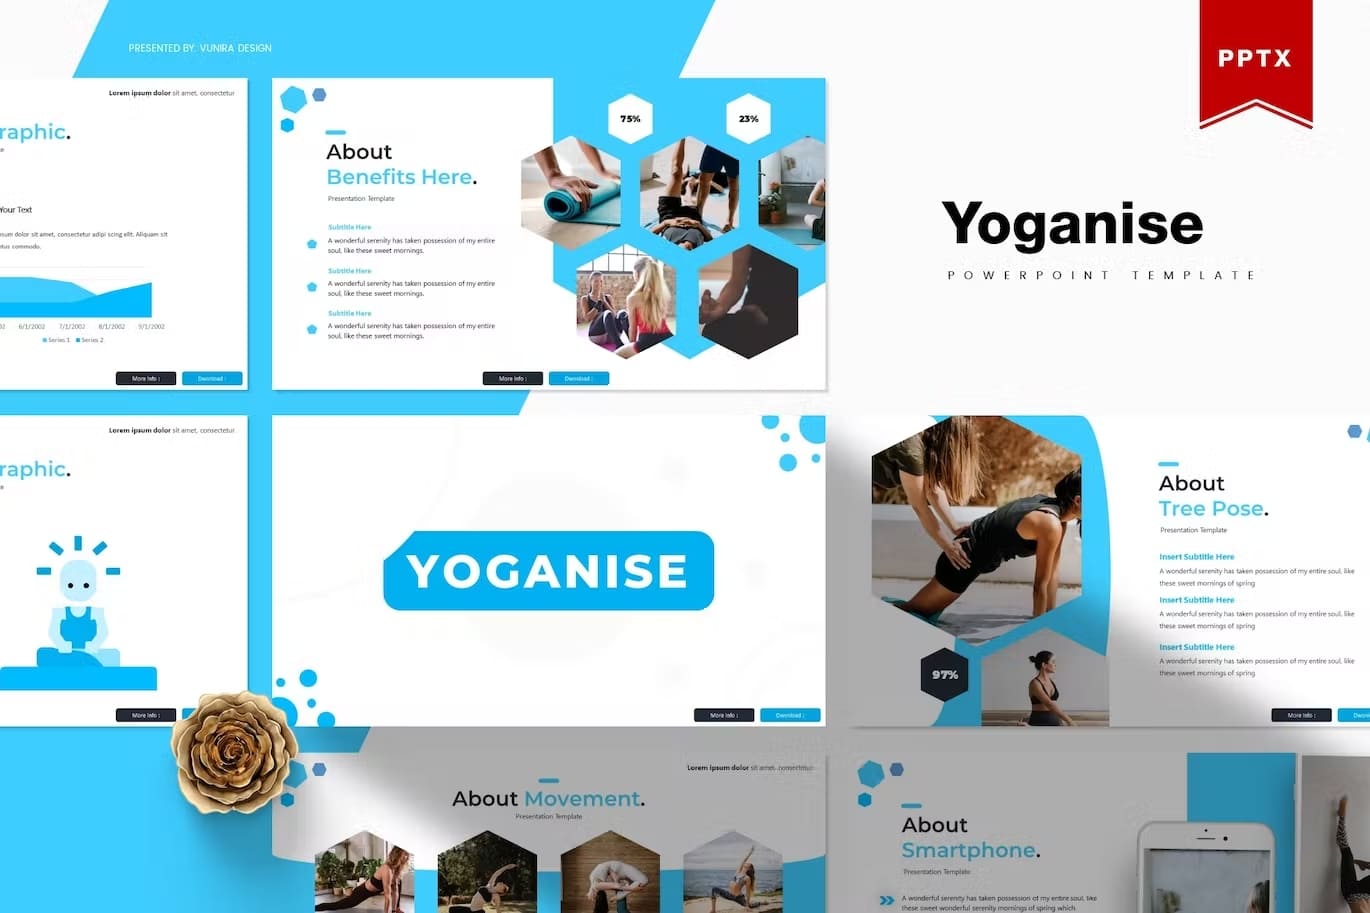 Yoganise PowerPoint template on smartphone screen: About Benefits Here, About Tree Pose.